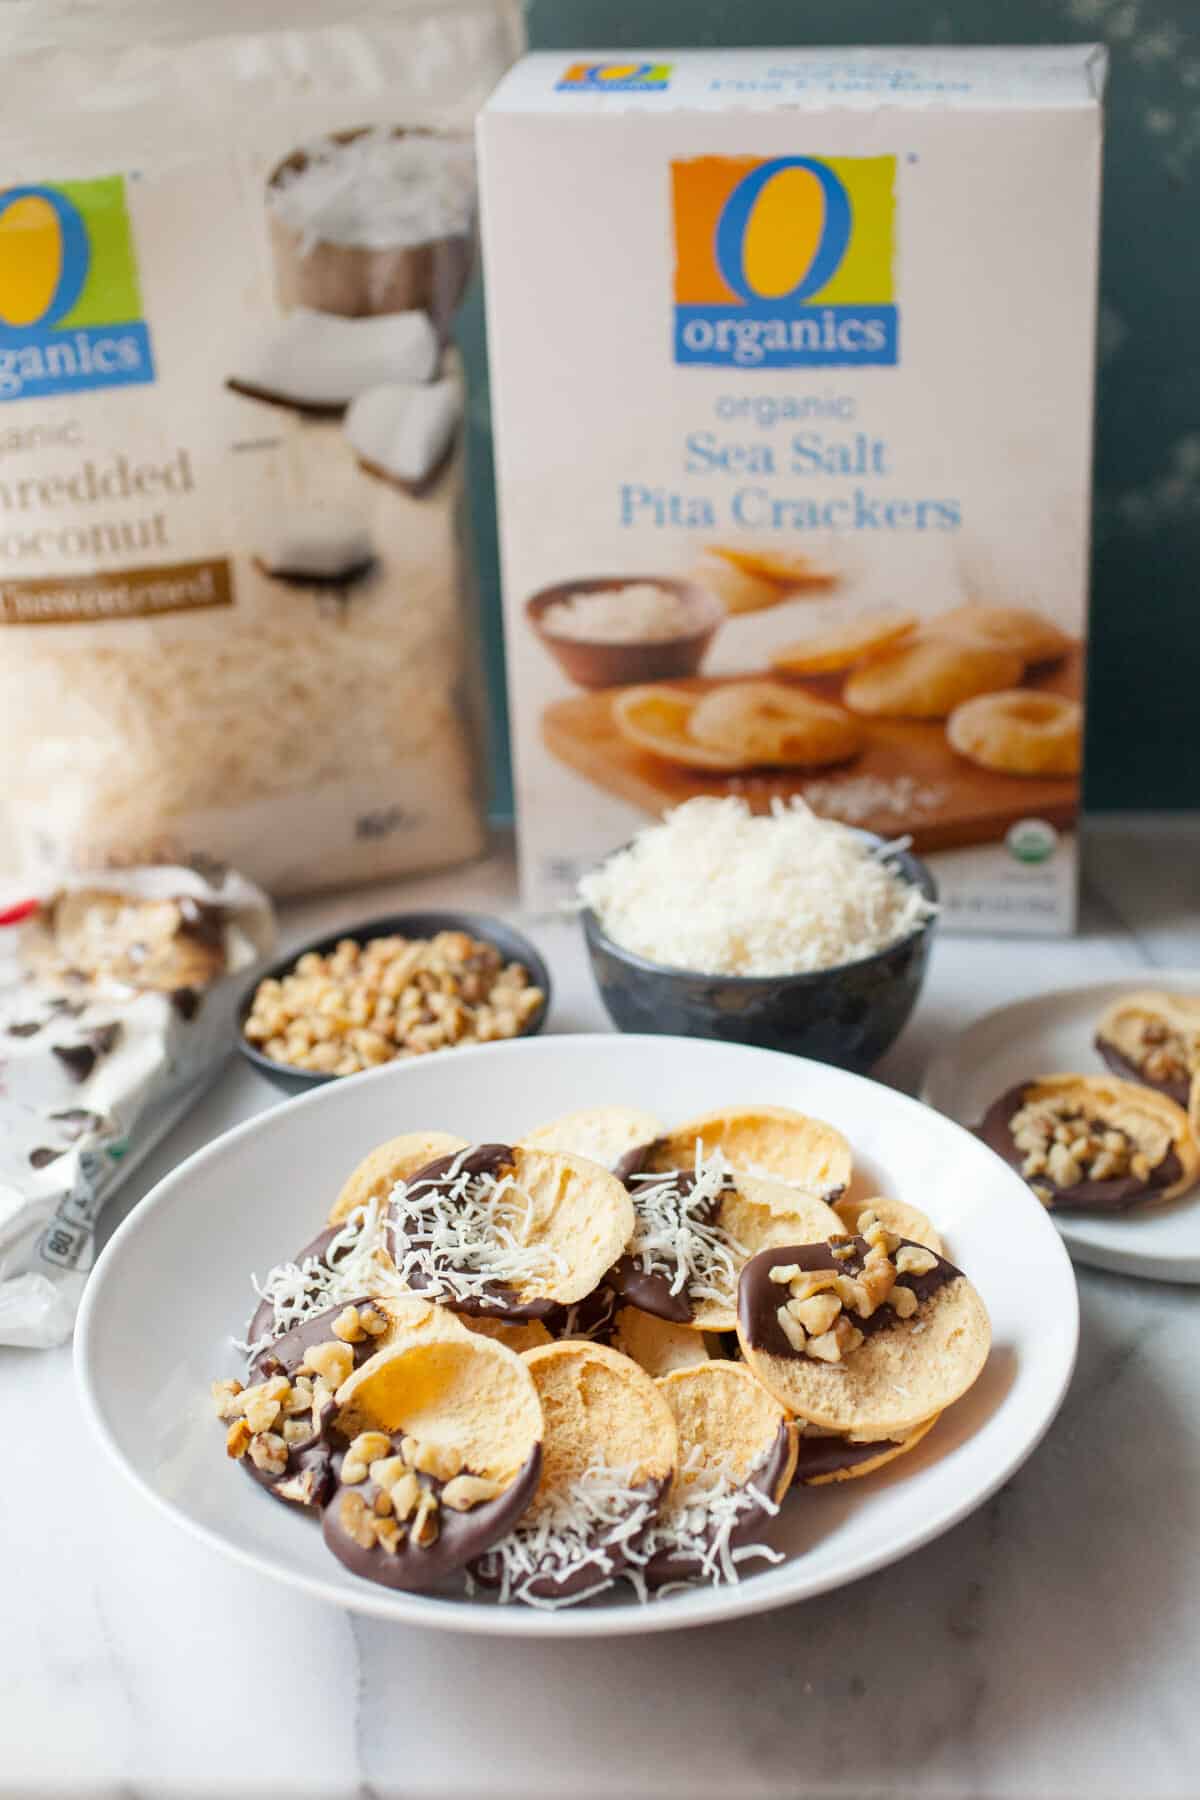 Chocolate Covered Pita Crackers: These fun little appetizers are the perfect mix of salty and sweet. They will disappear from your snack bowl! | macheesmo.com